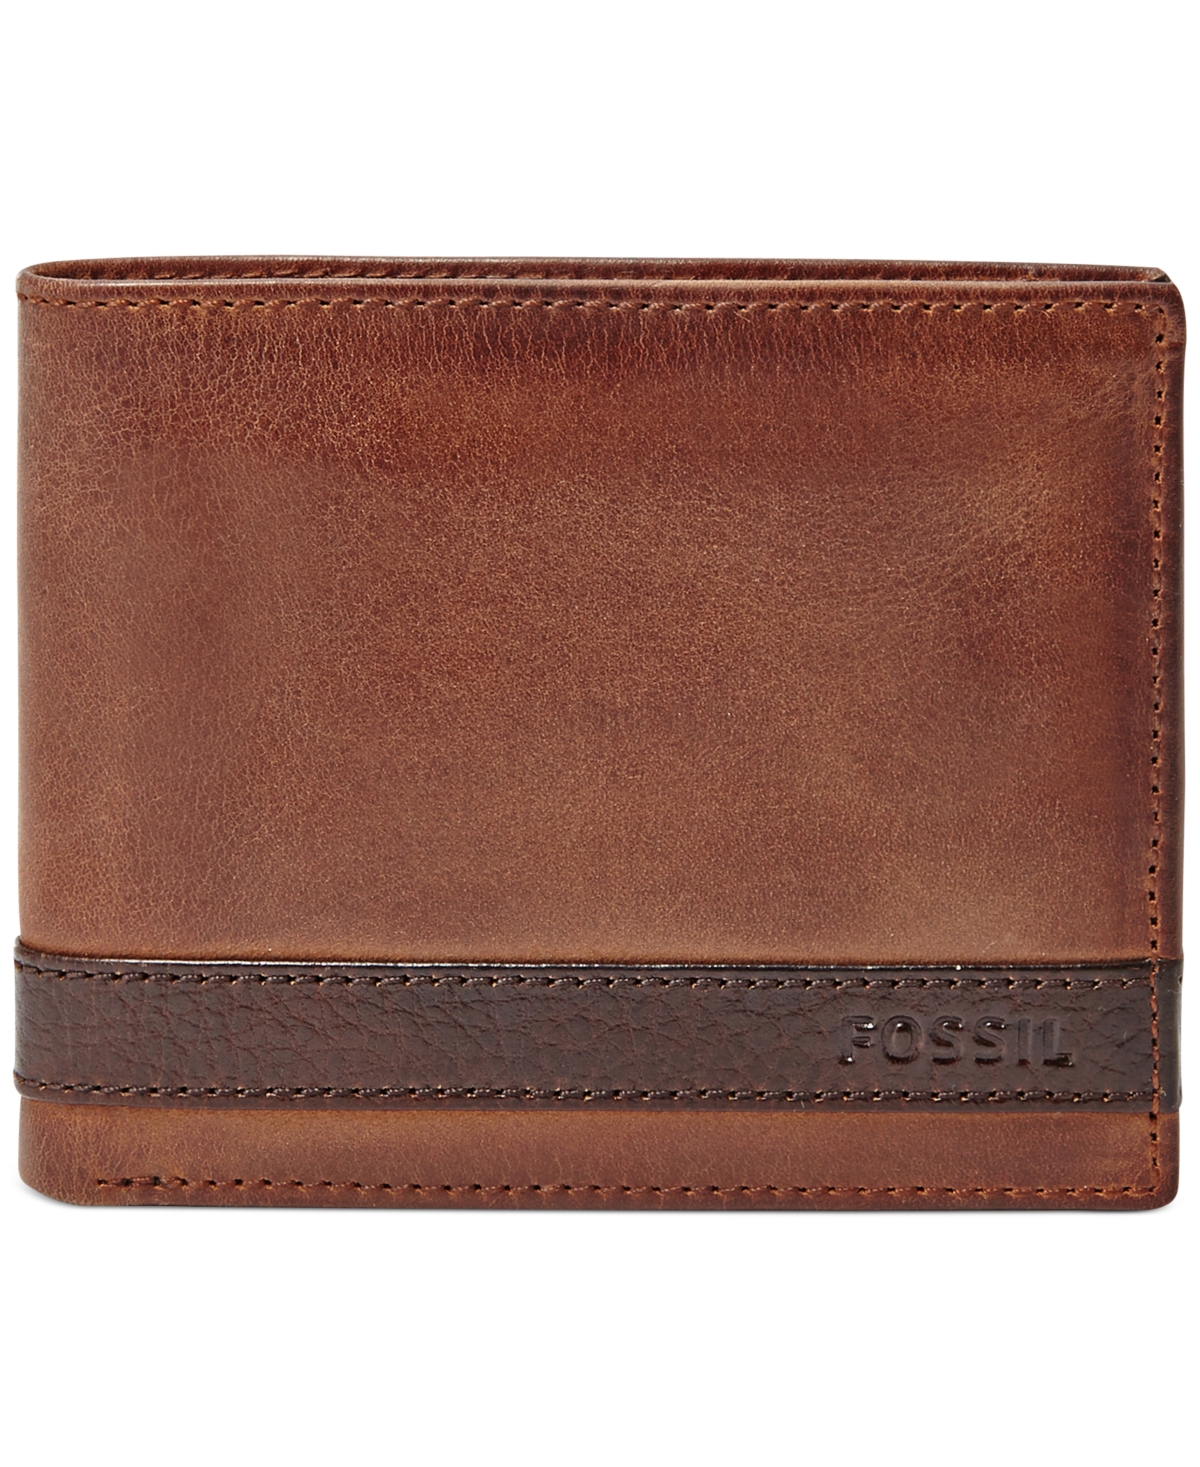 UPC 762346311805 product image for Men's Fossil Quinn Bifold With Flip Id Leather Wallet | upcitemdb.com